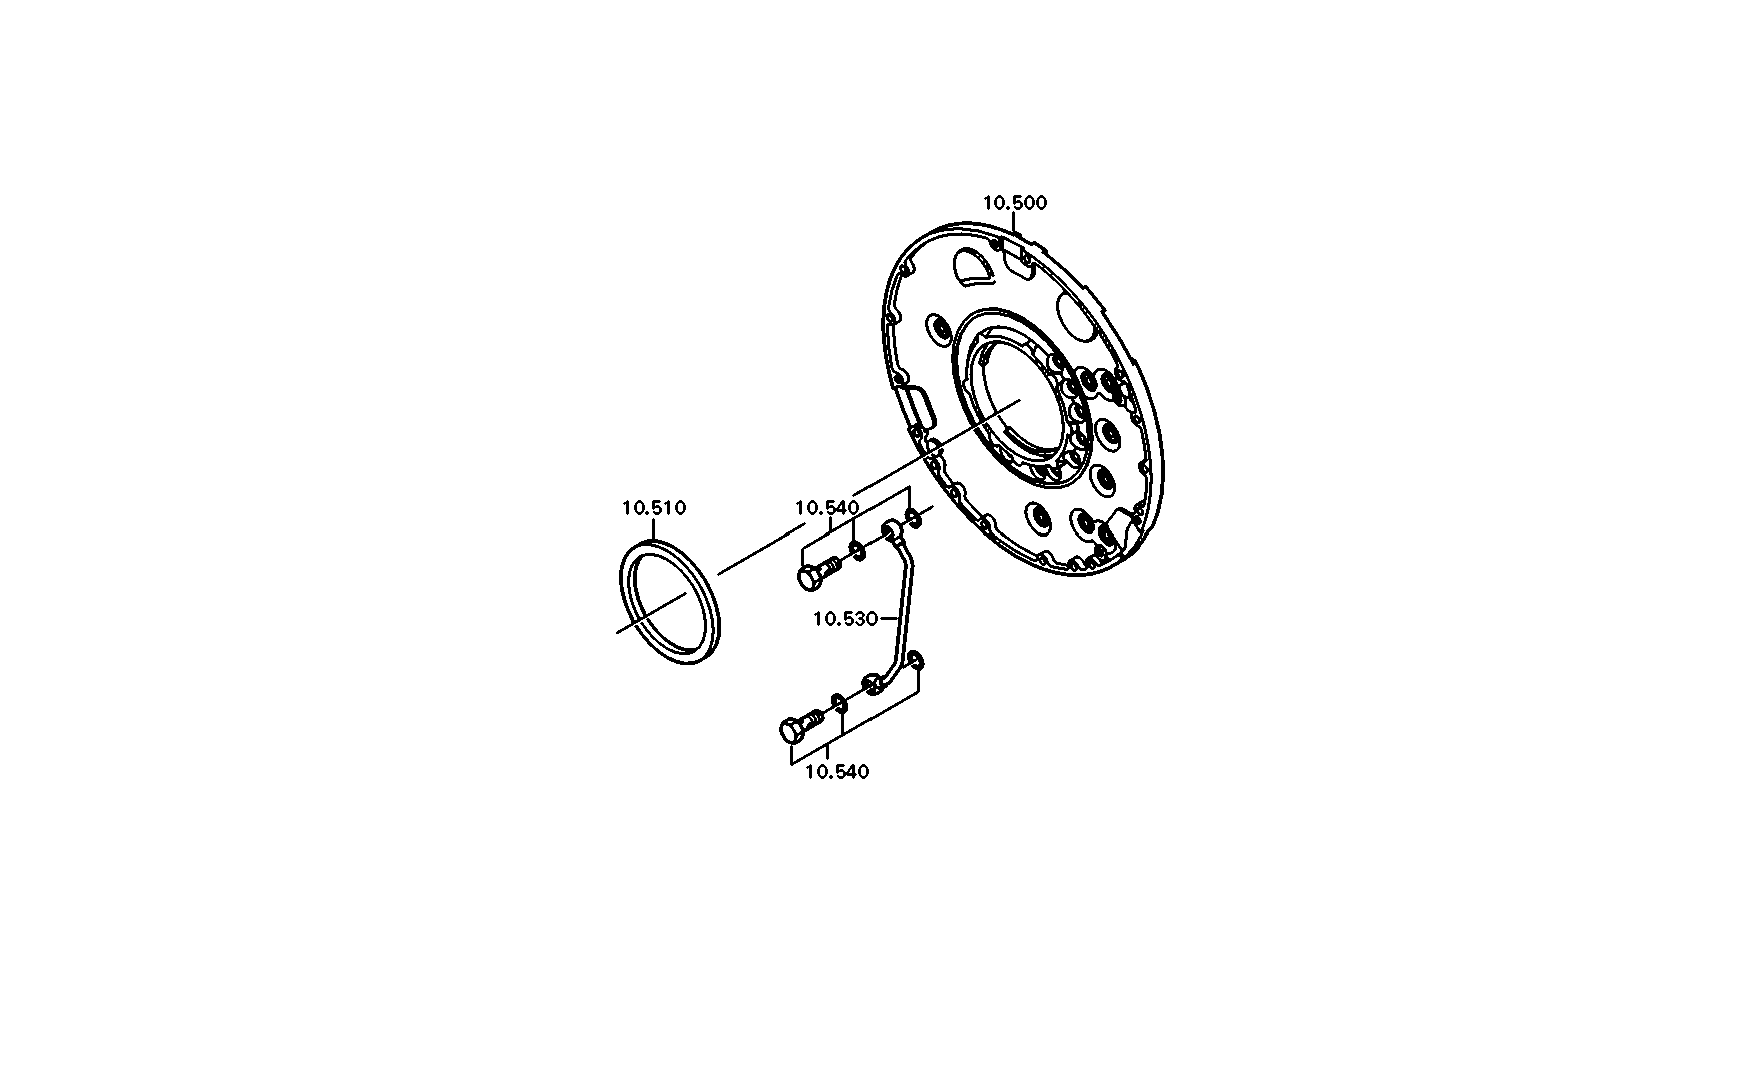 drawing for BELL-SUEDAFRIKA 7380013 - SHAFT SEAL (figure 4)